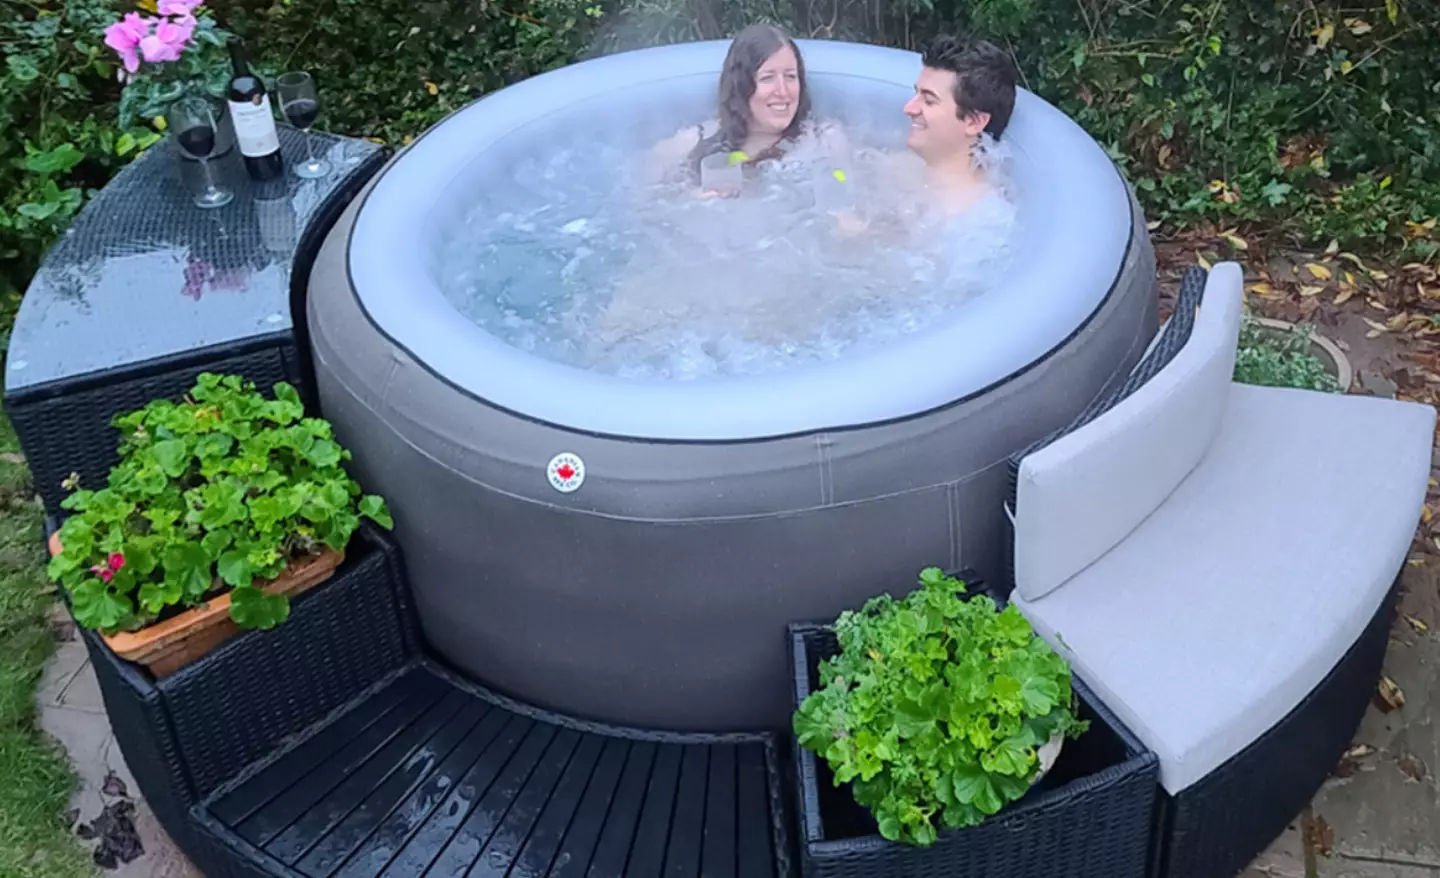 The Canadian Spa Company Grand Rapids Inflatable Hot Tub Spa has £244 off, making it a summer bargain.